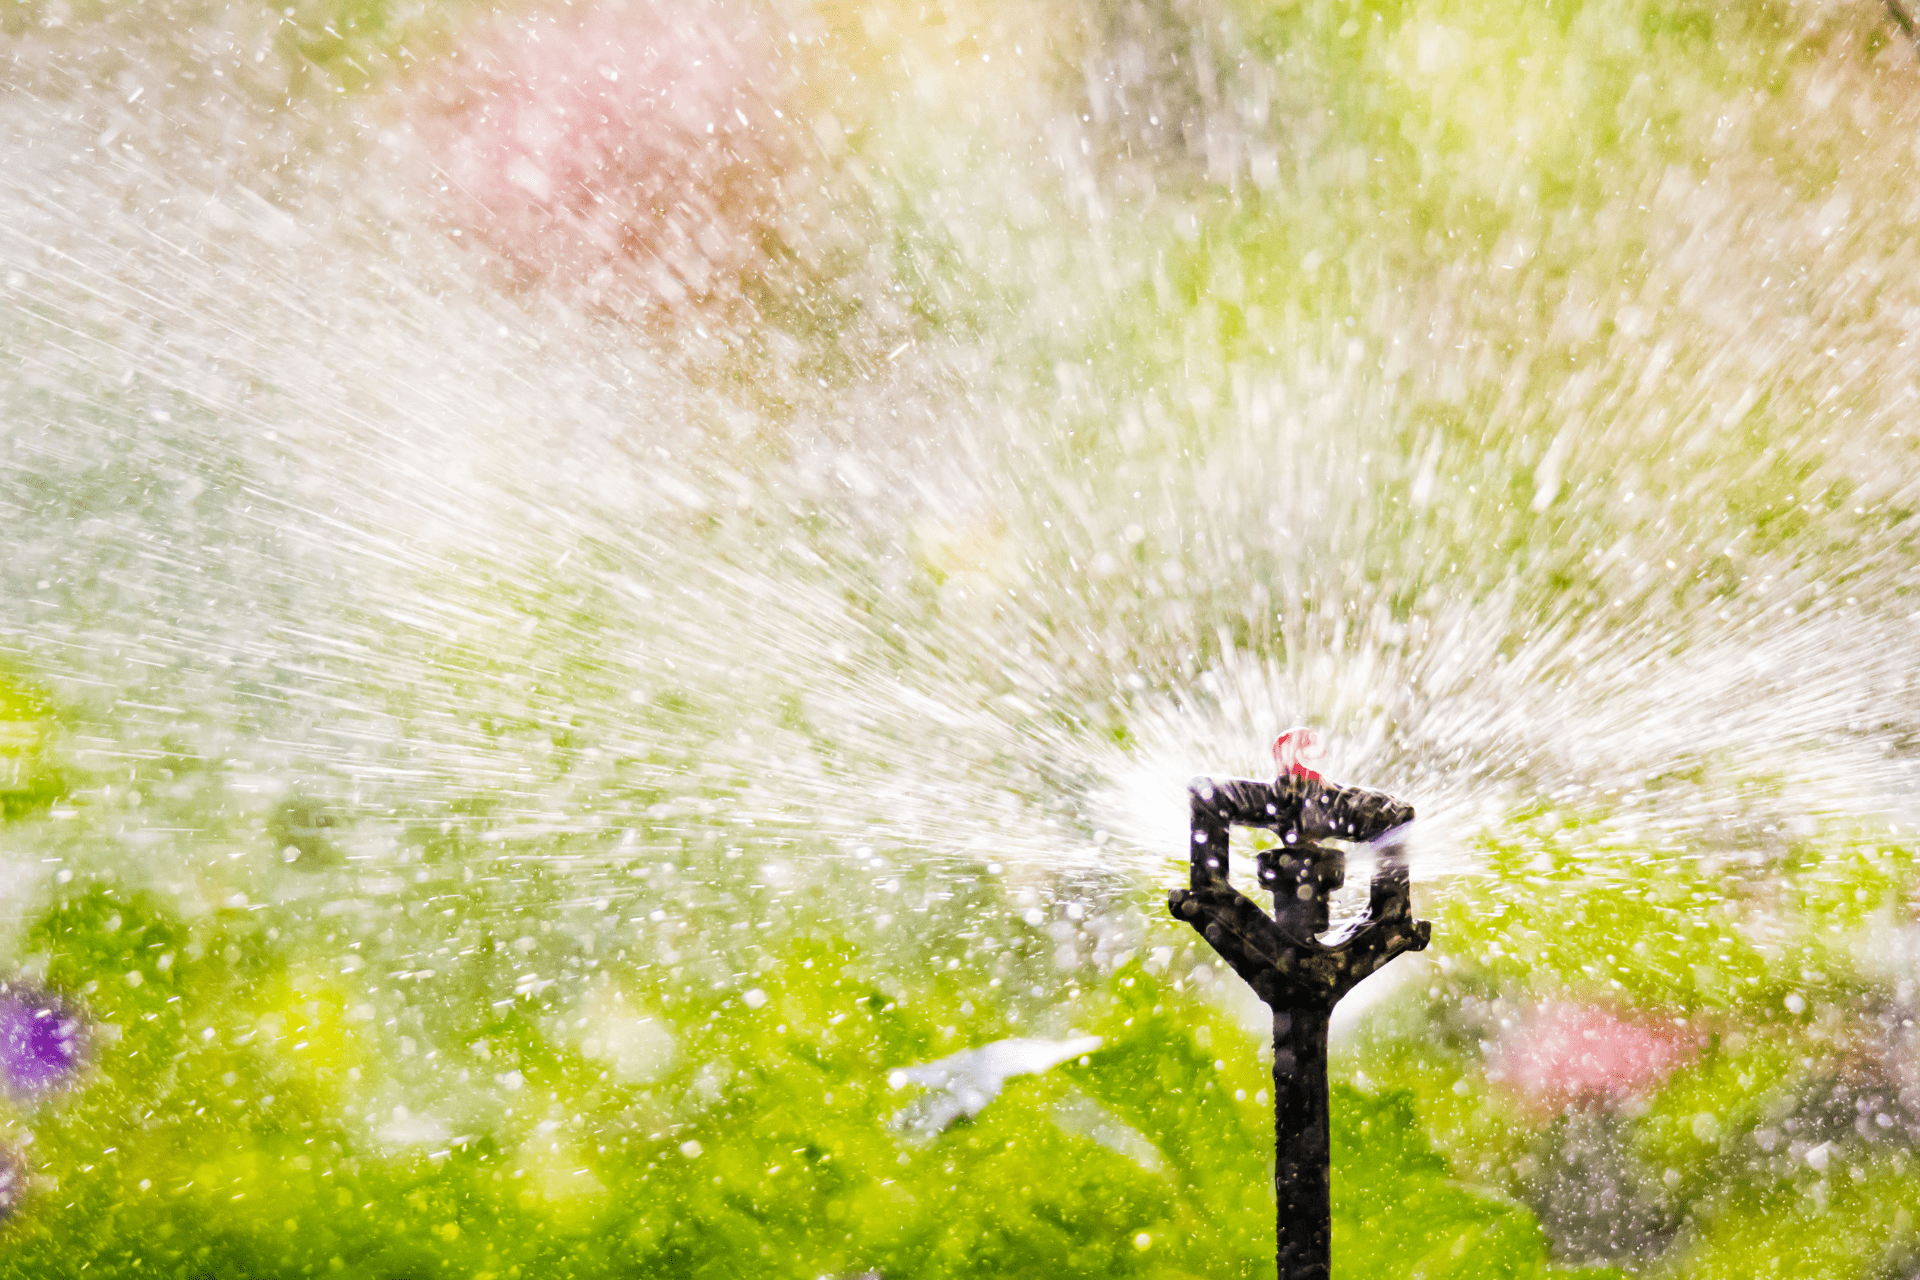 A sprinkler irrigation system watering the plants in a garden in Boise